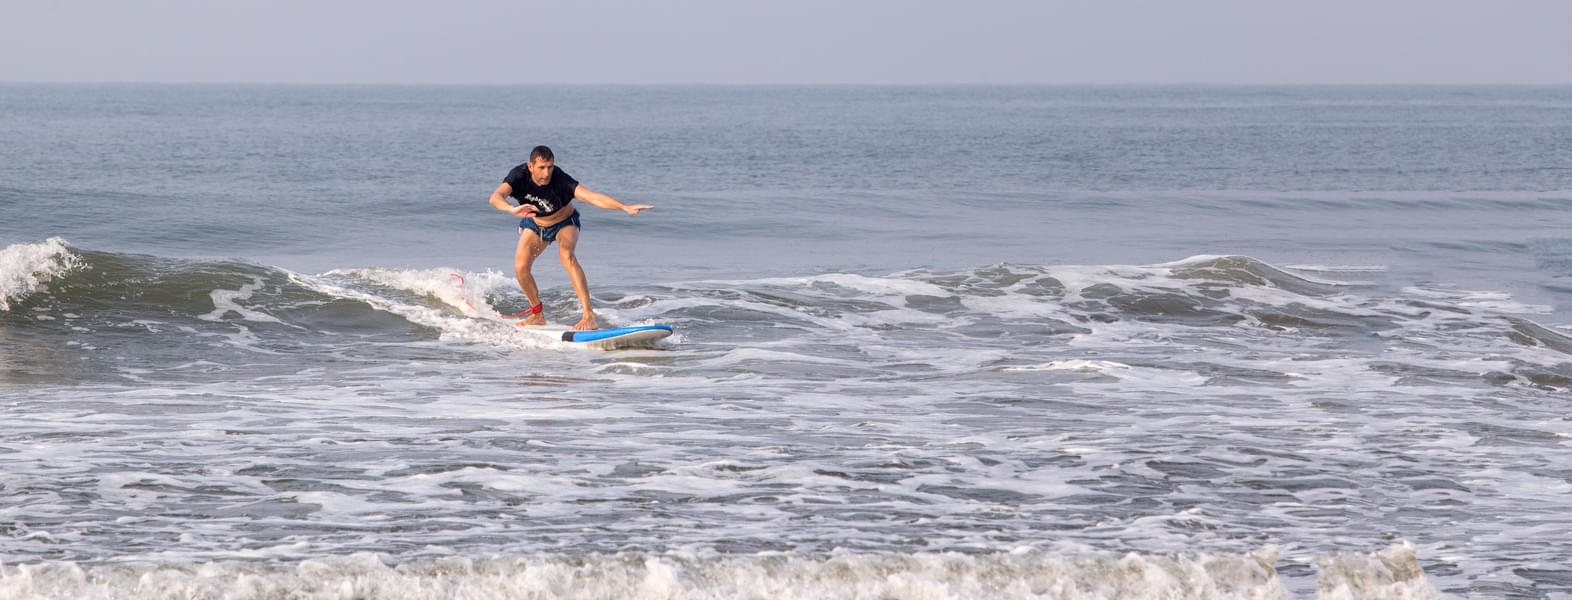 Water Surfing in Goa at Mandrem Beach Image